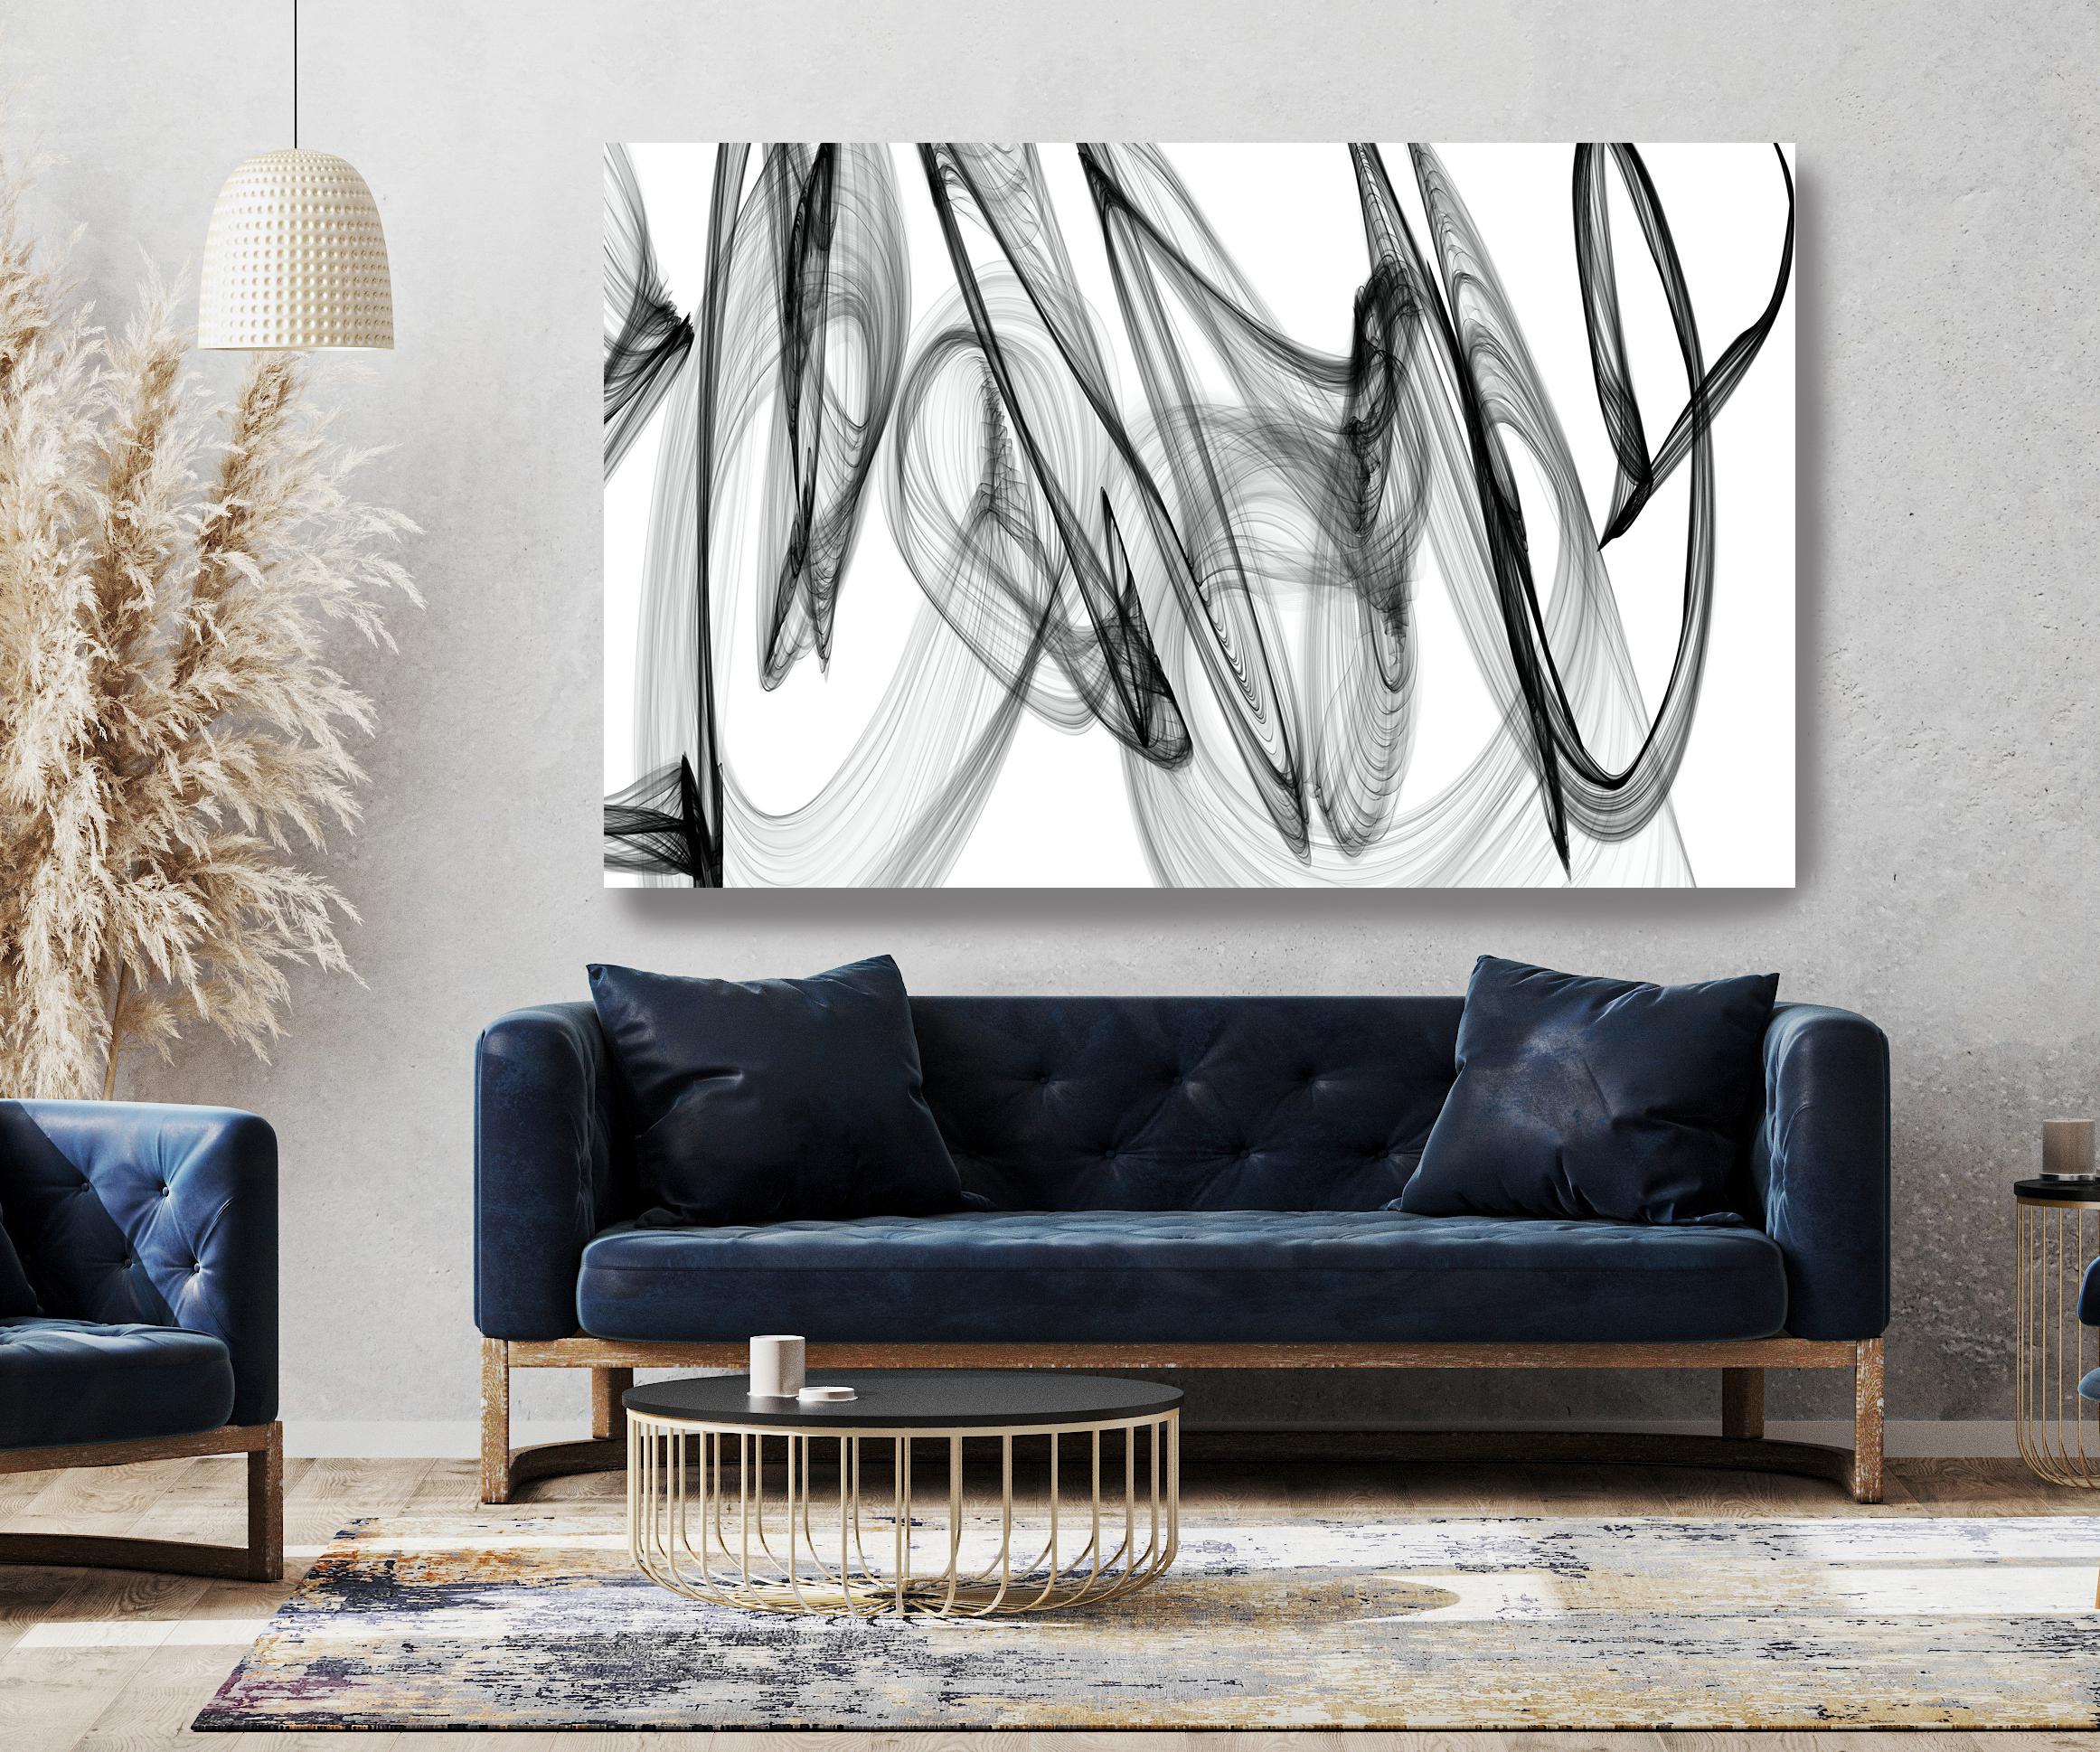 Irena Orlov Abstract Painting - Black and White Minimalist New Media vs Painting 46"H X 80"W A Powerful Force